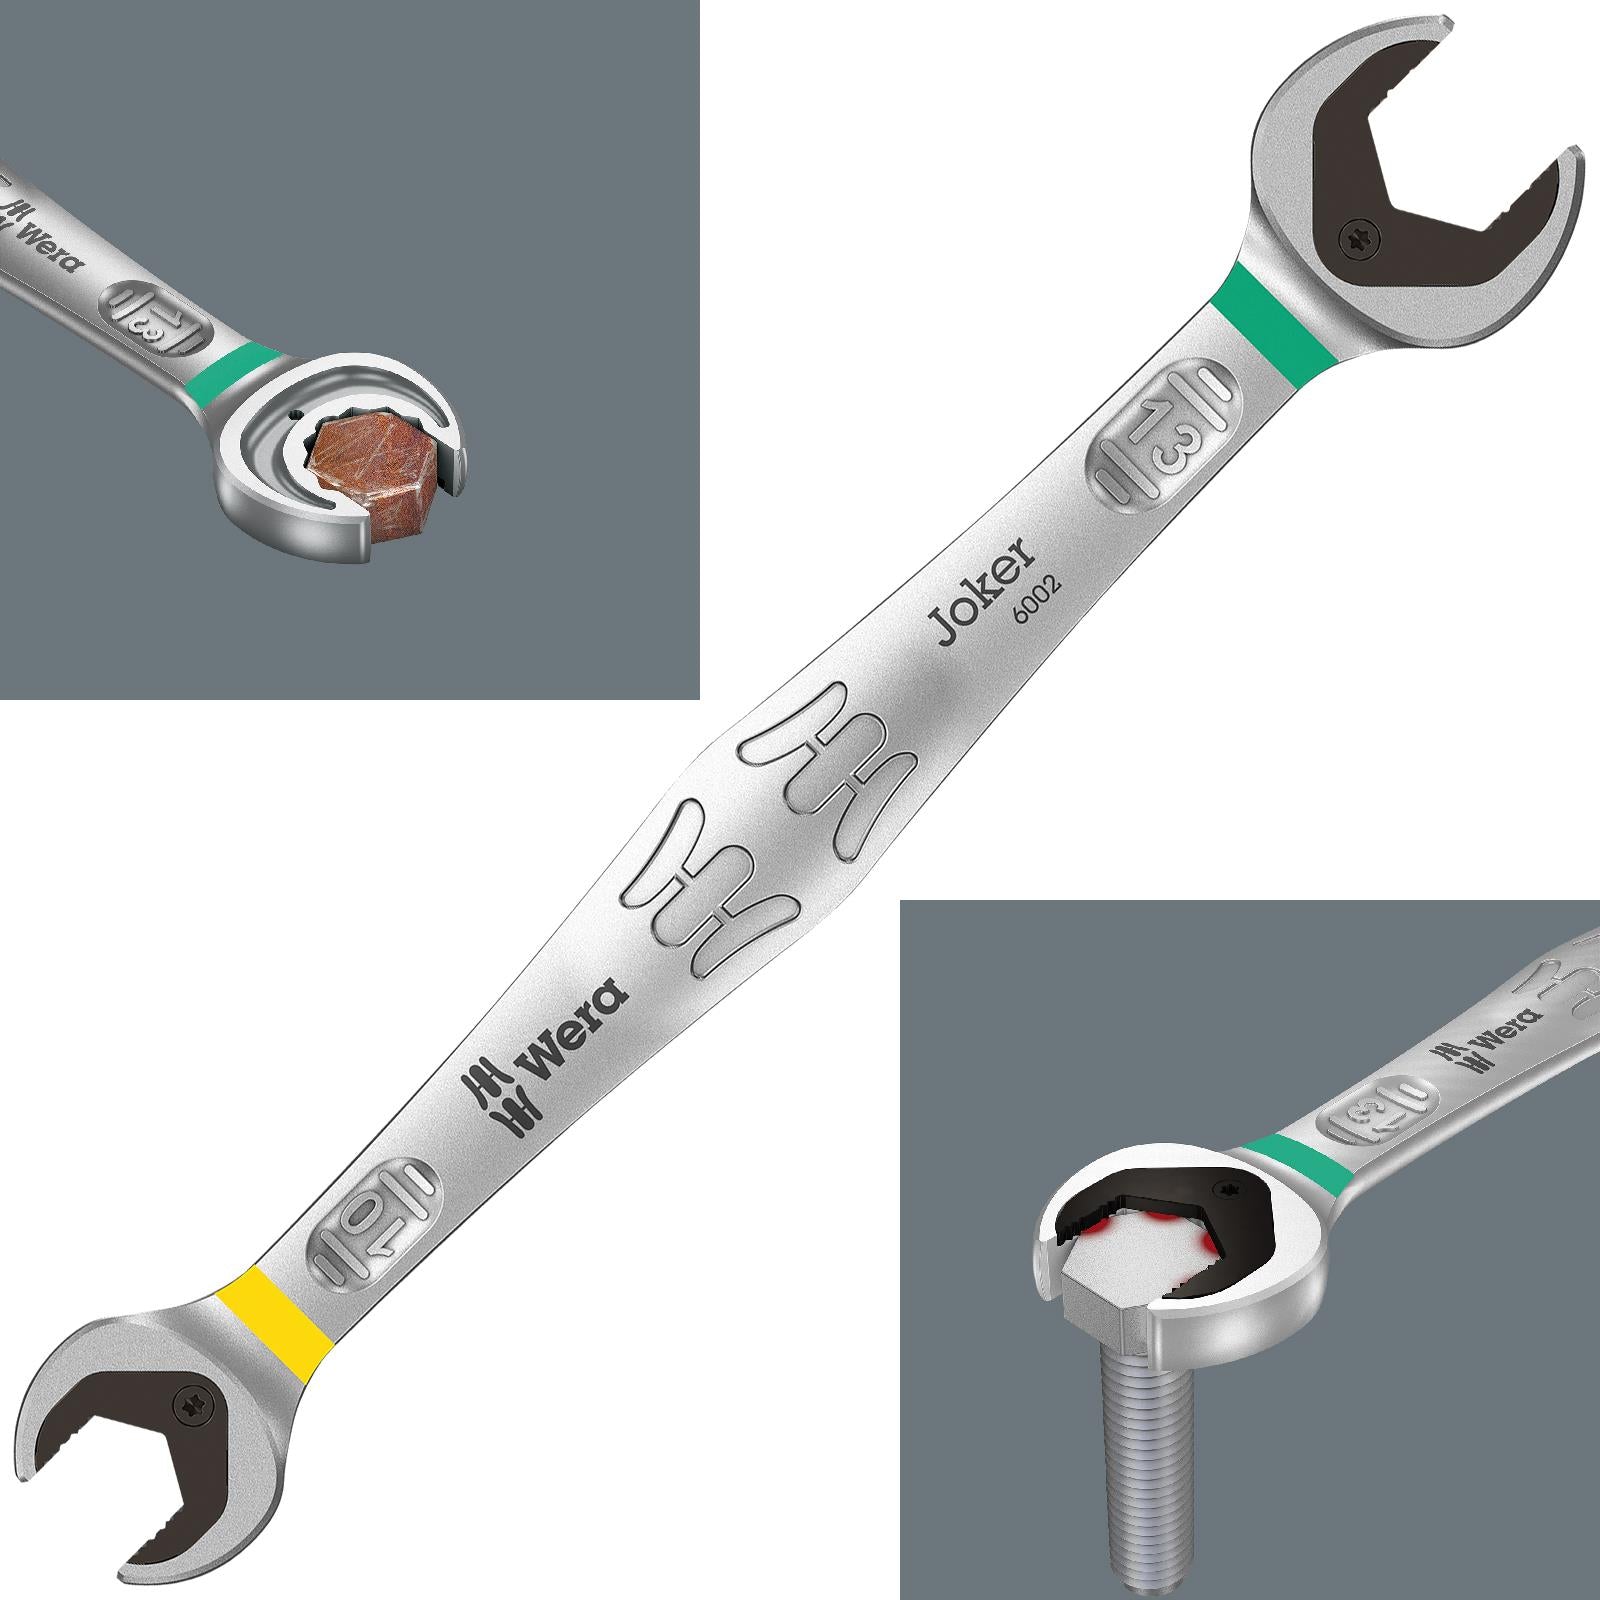 Wera 6002 Joker Double Open Ended Spanner Wrench Metric with Holding Function